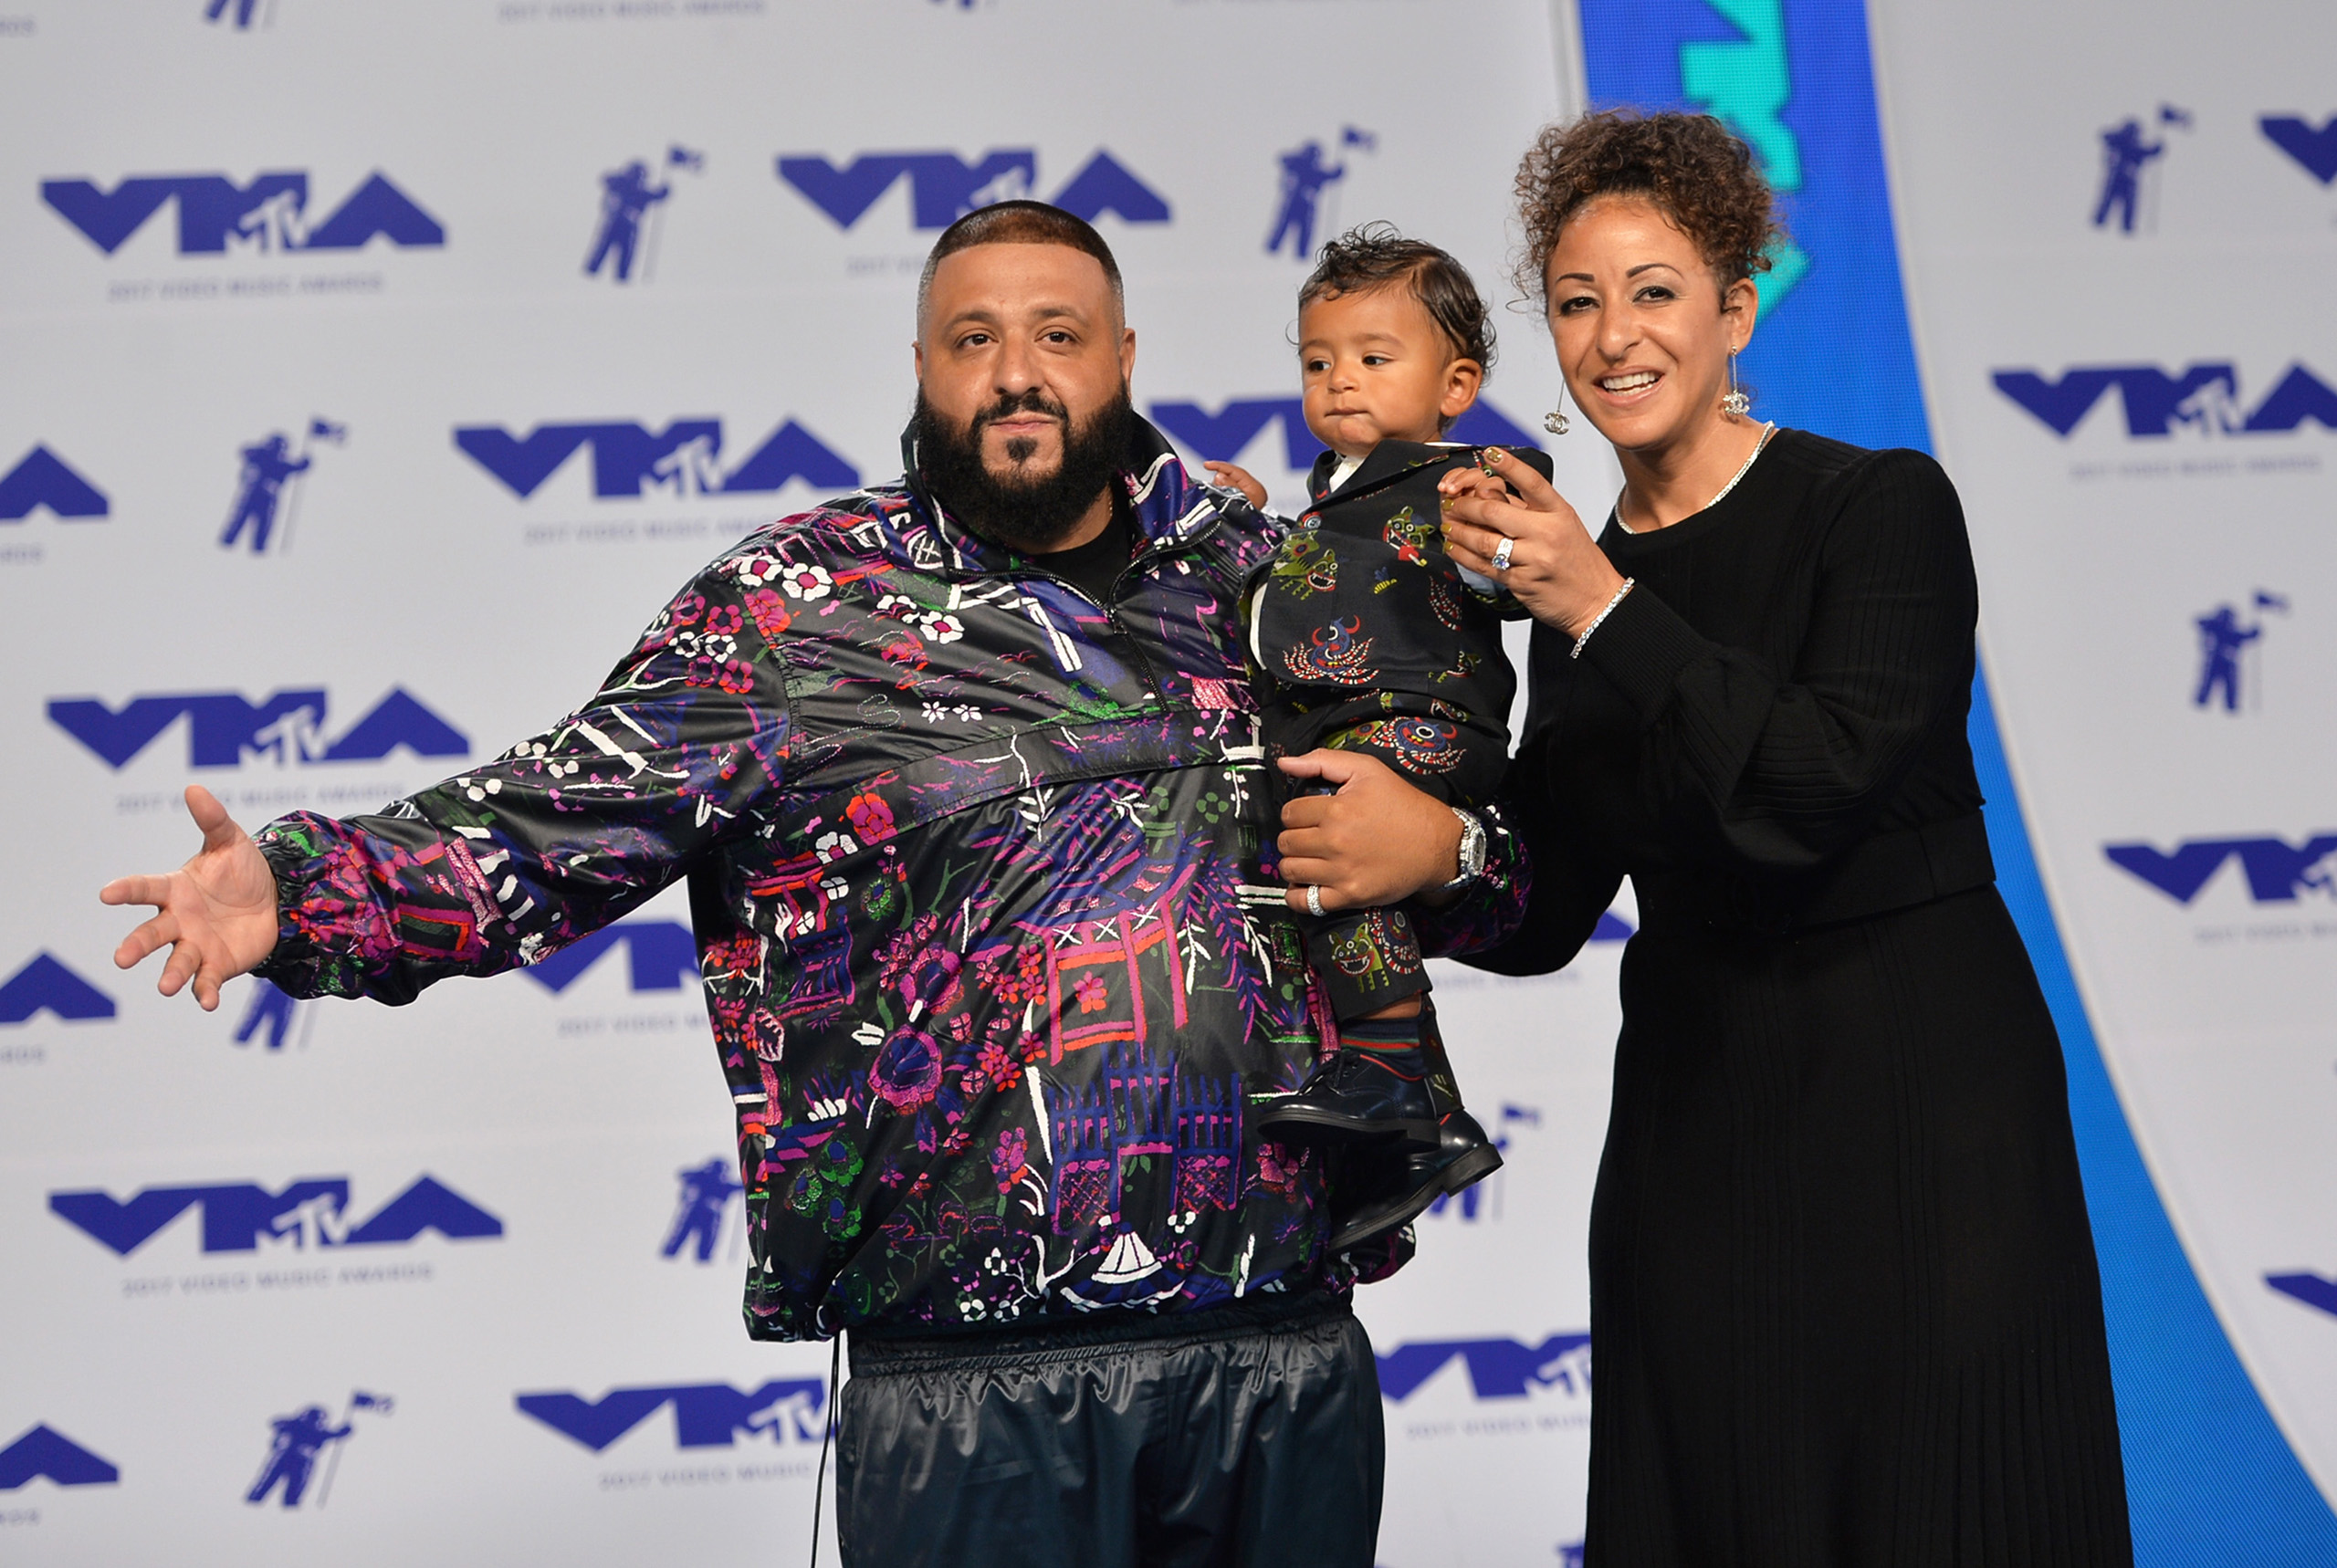 DJ Khaled, Asahd Tuck Khaled and Nicole Tuck attend the 2017 MTV Video Music Awards at The Forum on Aug. 27, 2017 in Inglewood, Calif.